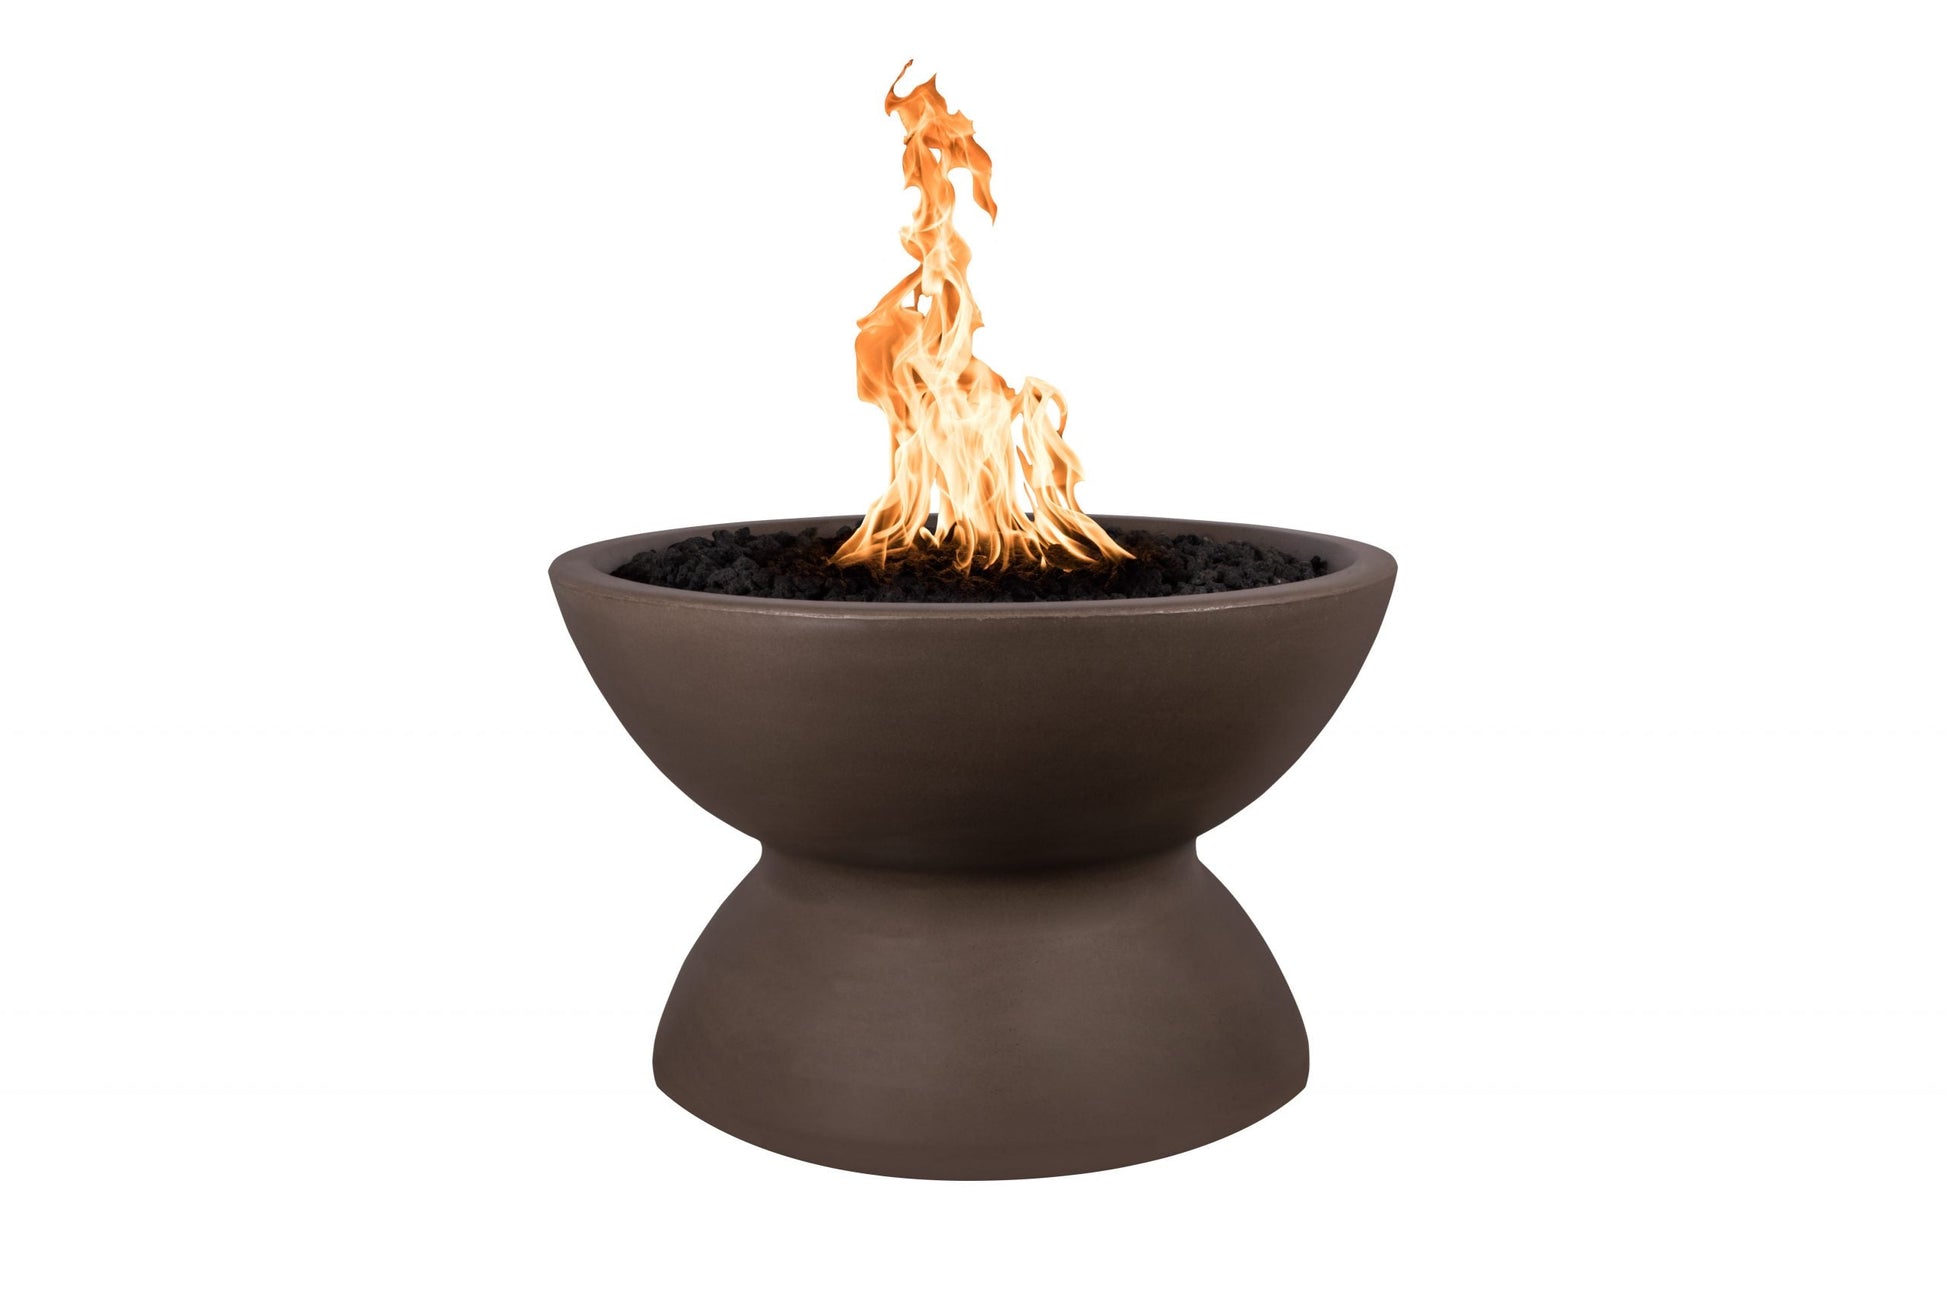 The Outdoor Plus Round Copa 33" Black GFRC Concrete Liquid Propane Fire Pit with 12V Electronic Ignition